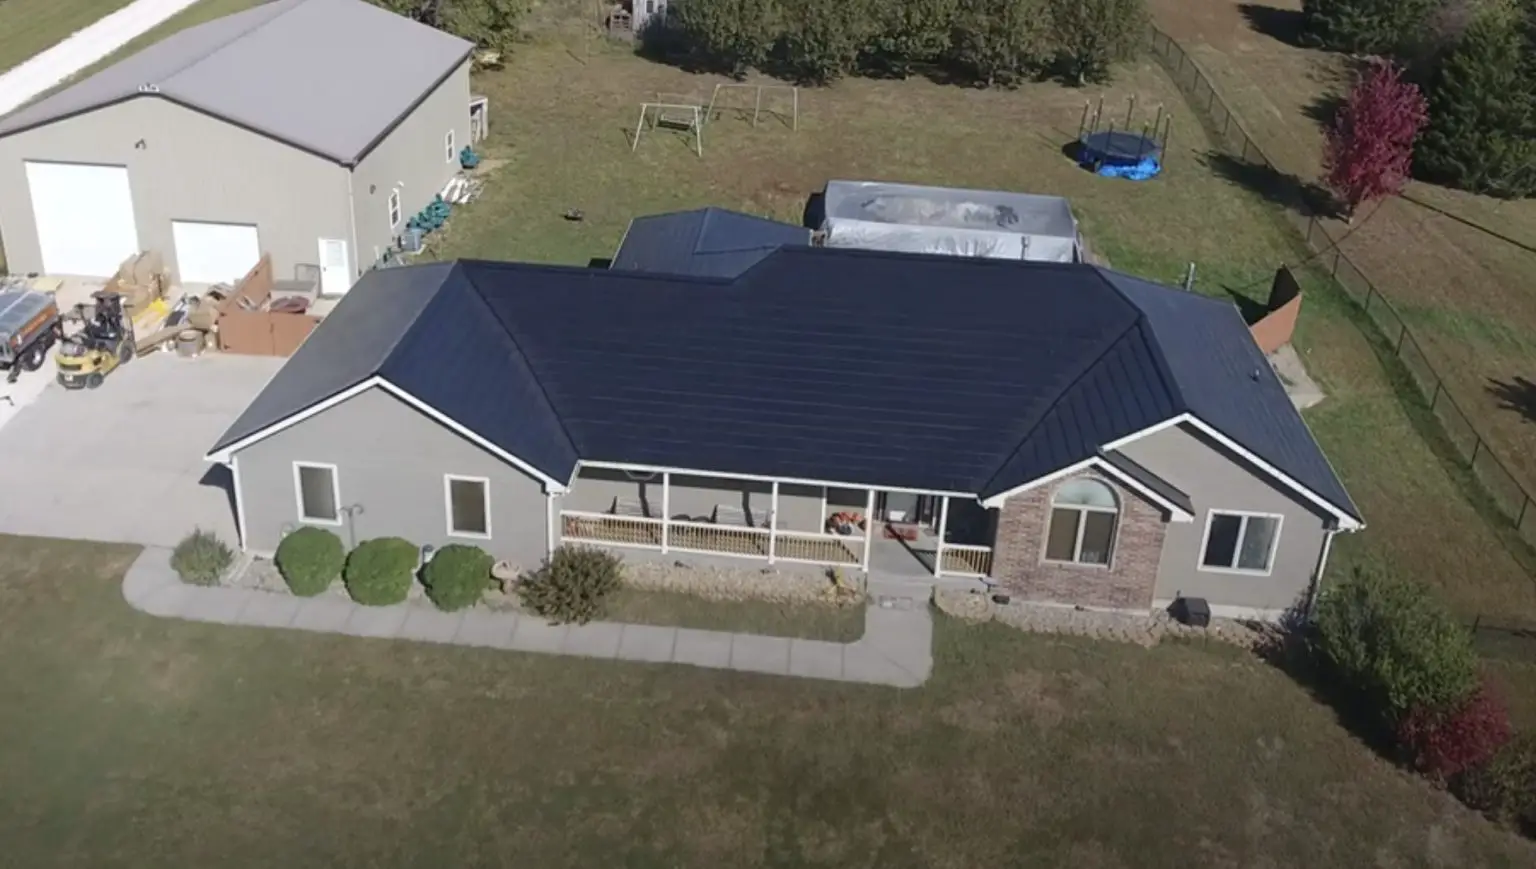 Tesla Solar Roof 15kW installation completed in 4 days ...